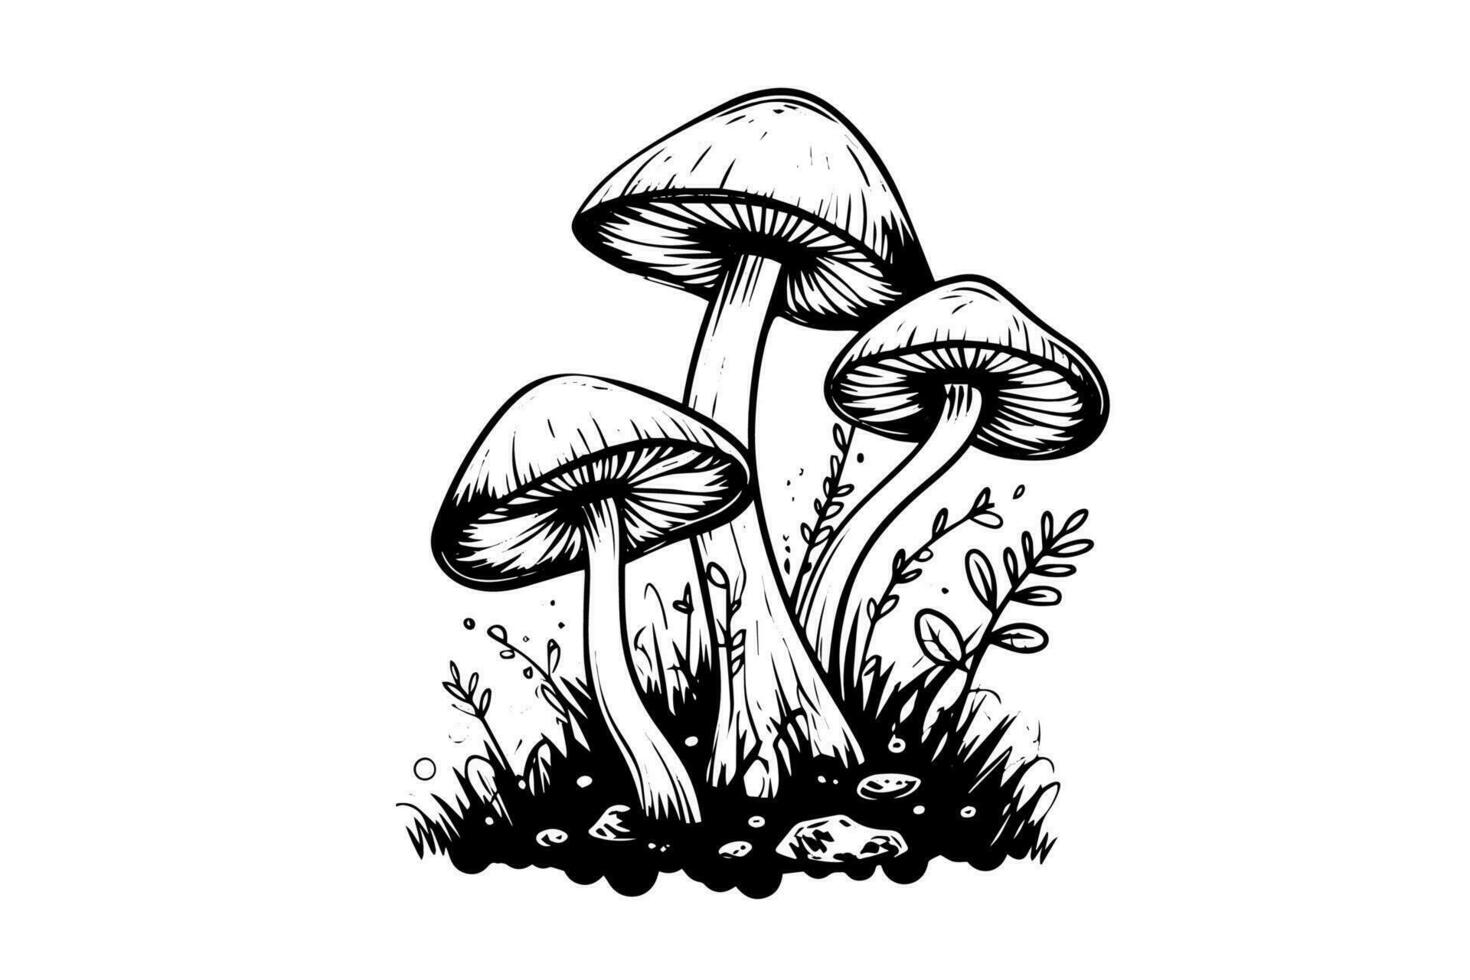 Fly agaric or amanita mushrooms group growing in grass engraving style. Vector illustration.